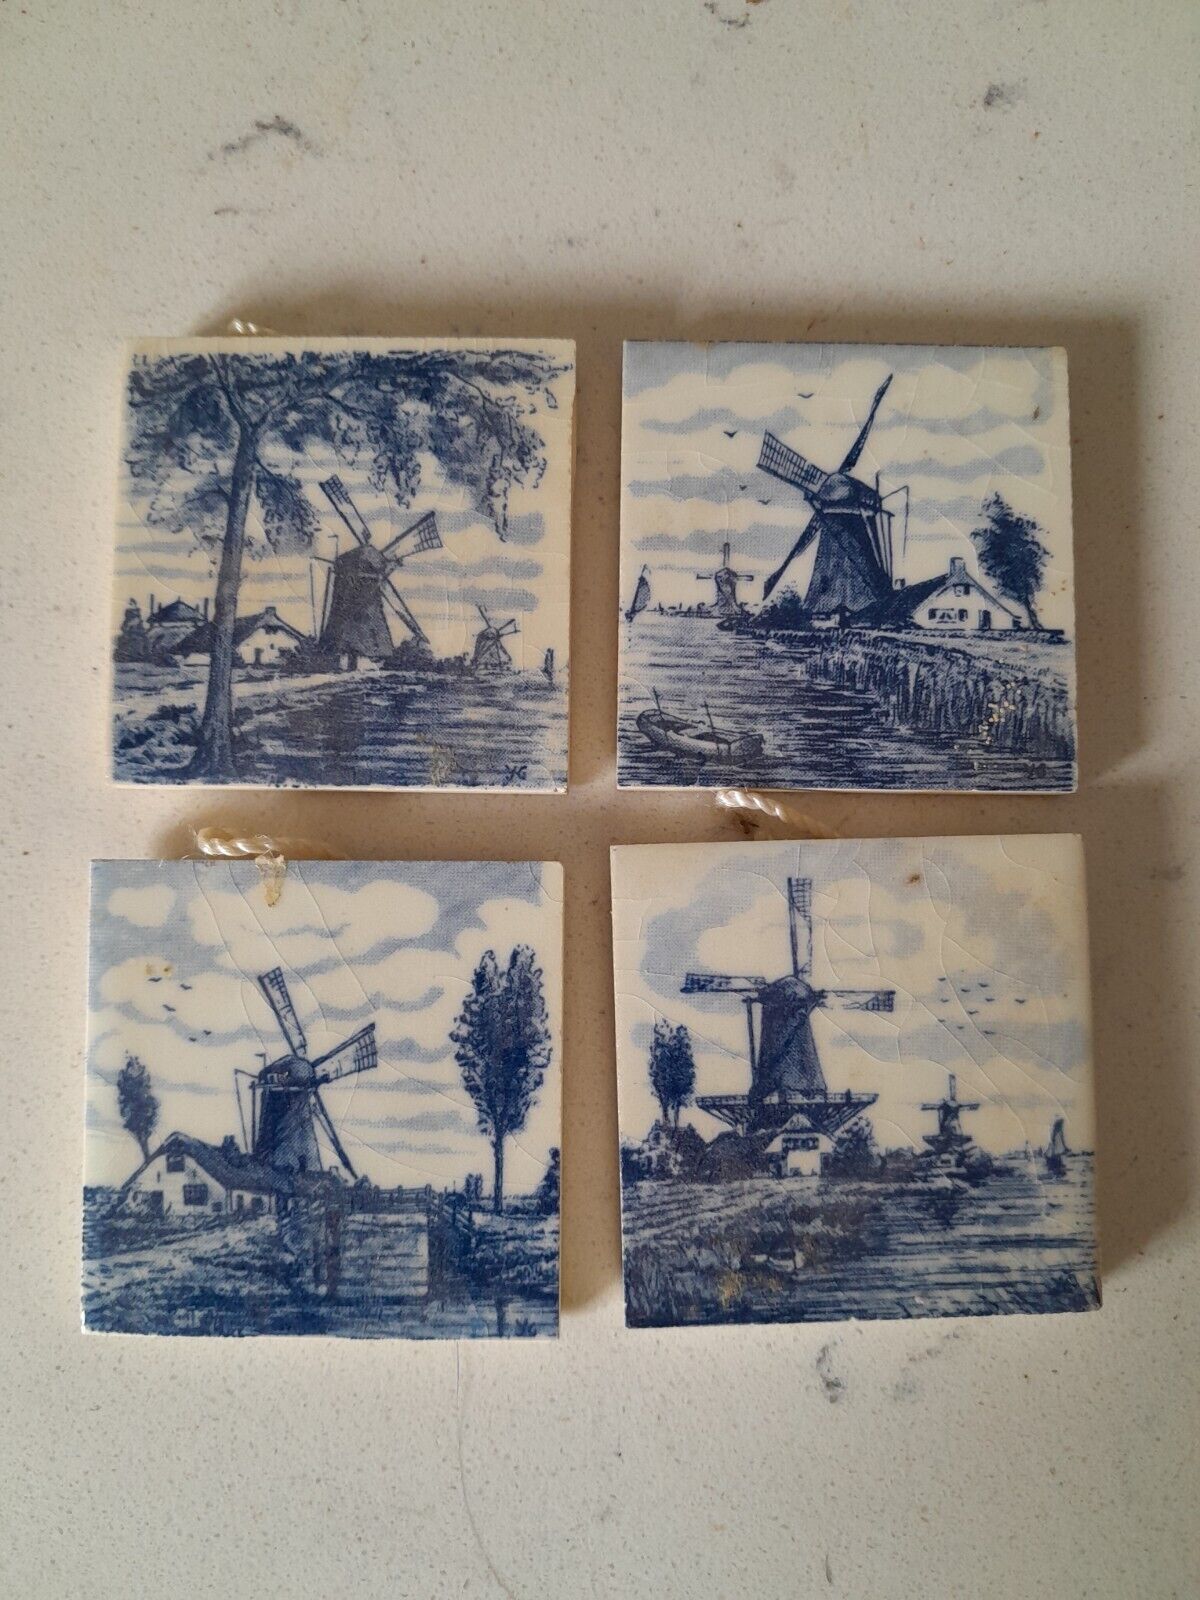 Vintage Blue And White Delft Tiles Wall Hanging Tiles Set Of 4 2 X 2 Inches 